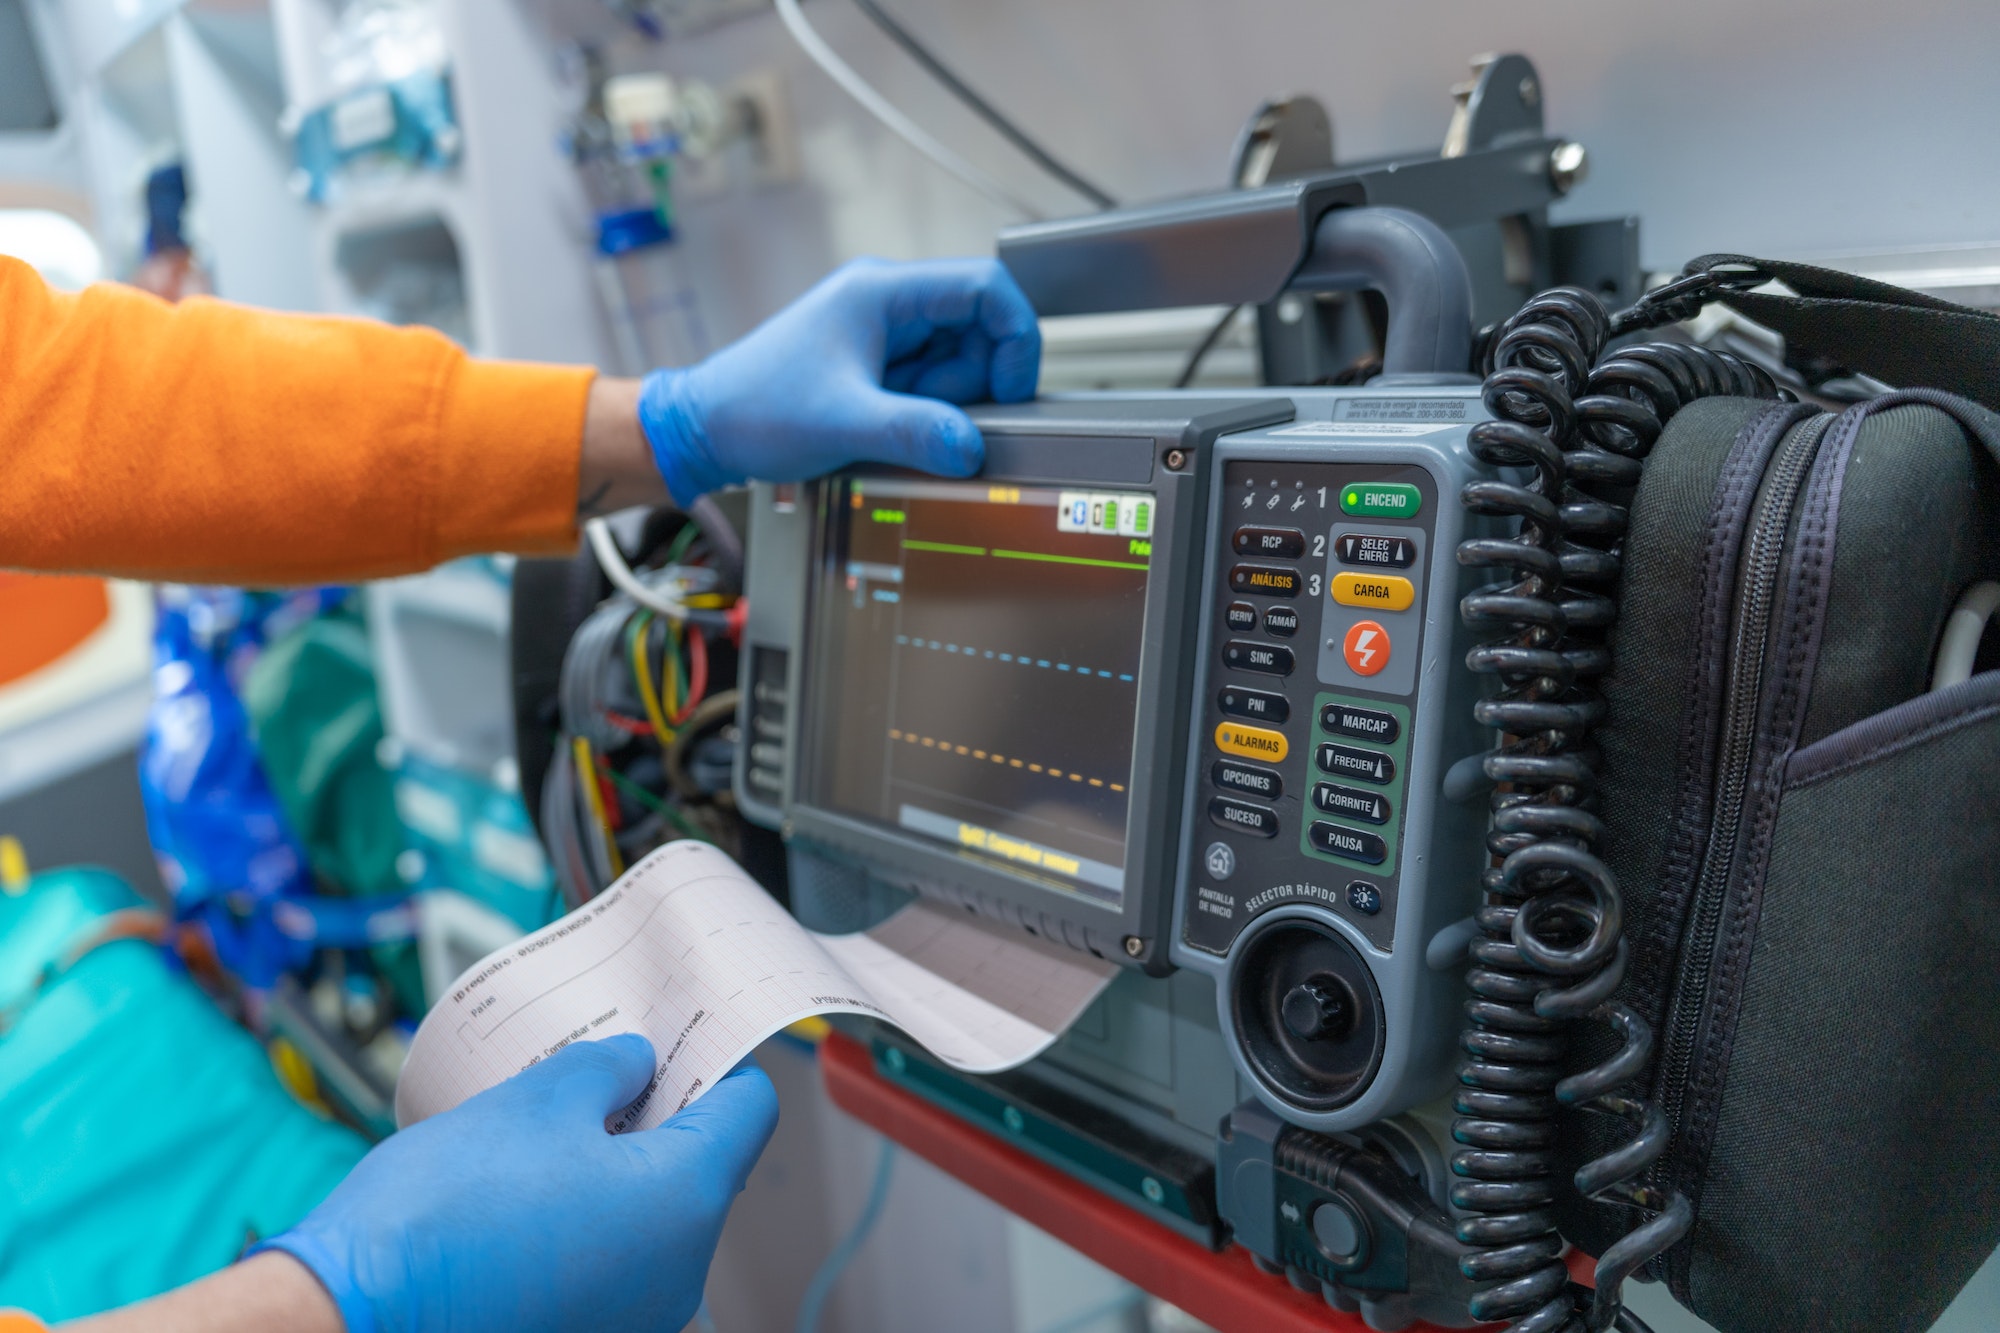 photo of a defibrillator monitor printing an electrocardiogram.